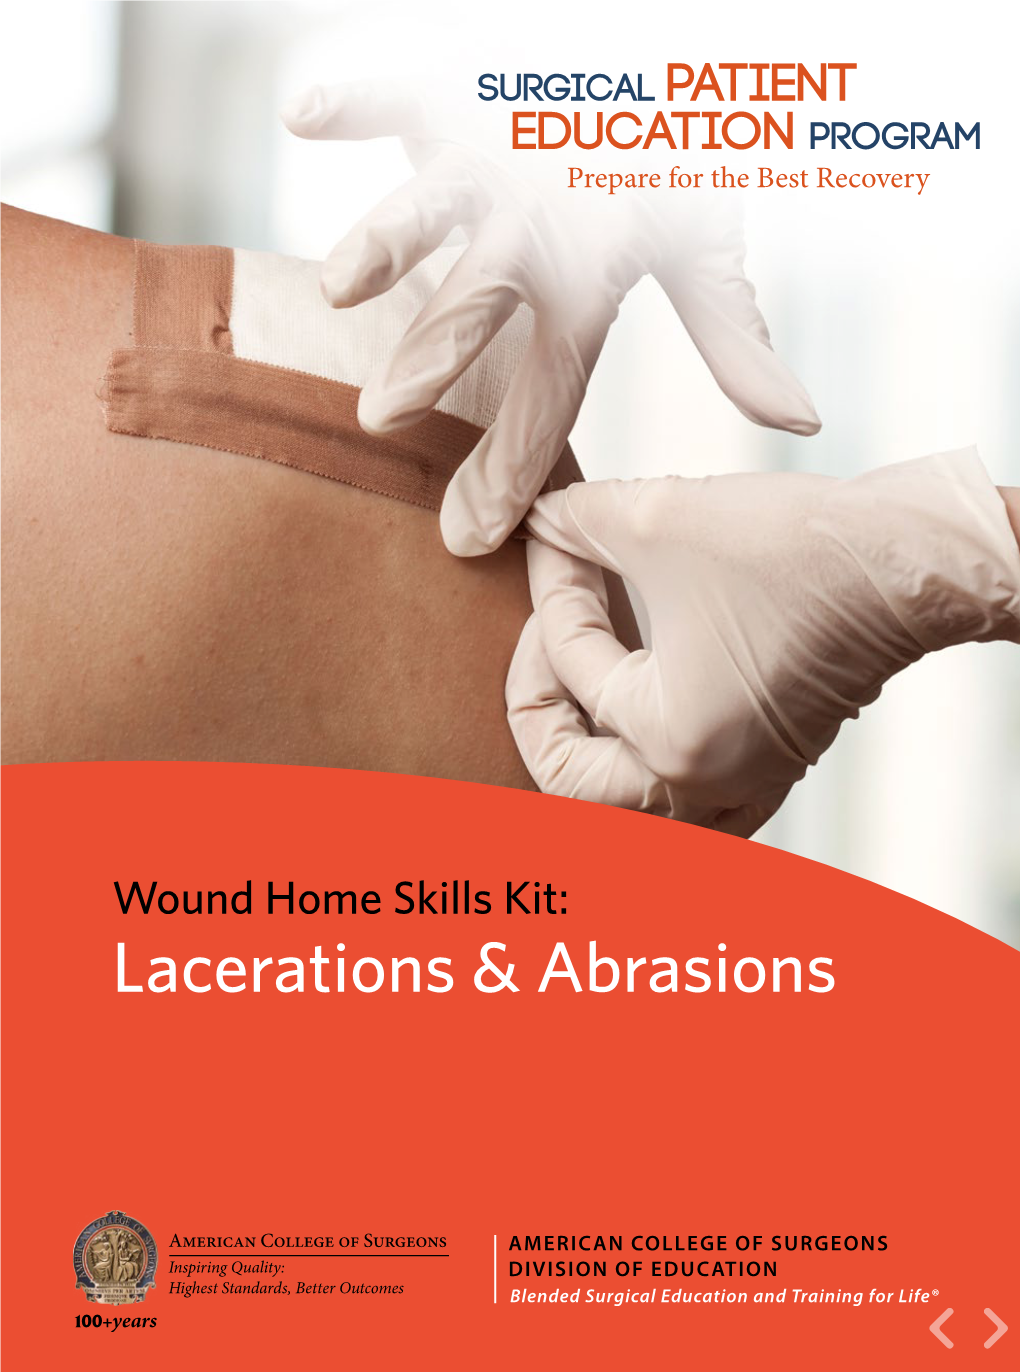 Wound Home Skills Kit: Lacerations and Abrasions